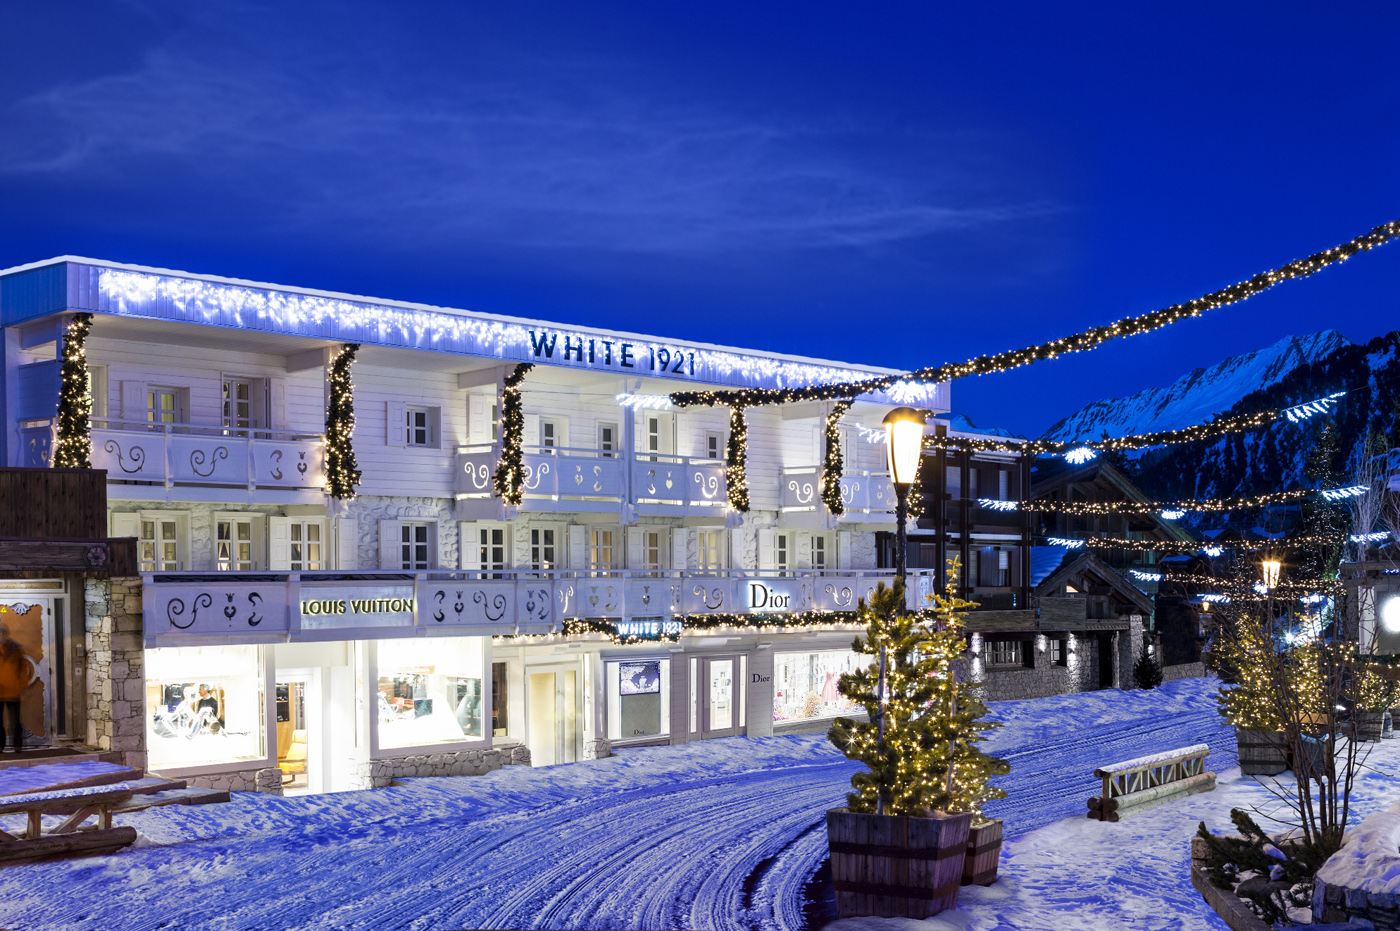 White 1921 Courchevel hotel review: elegance, grandeur and charm